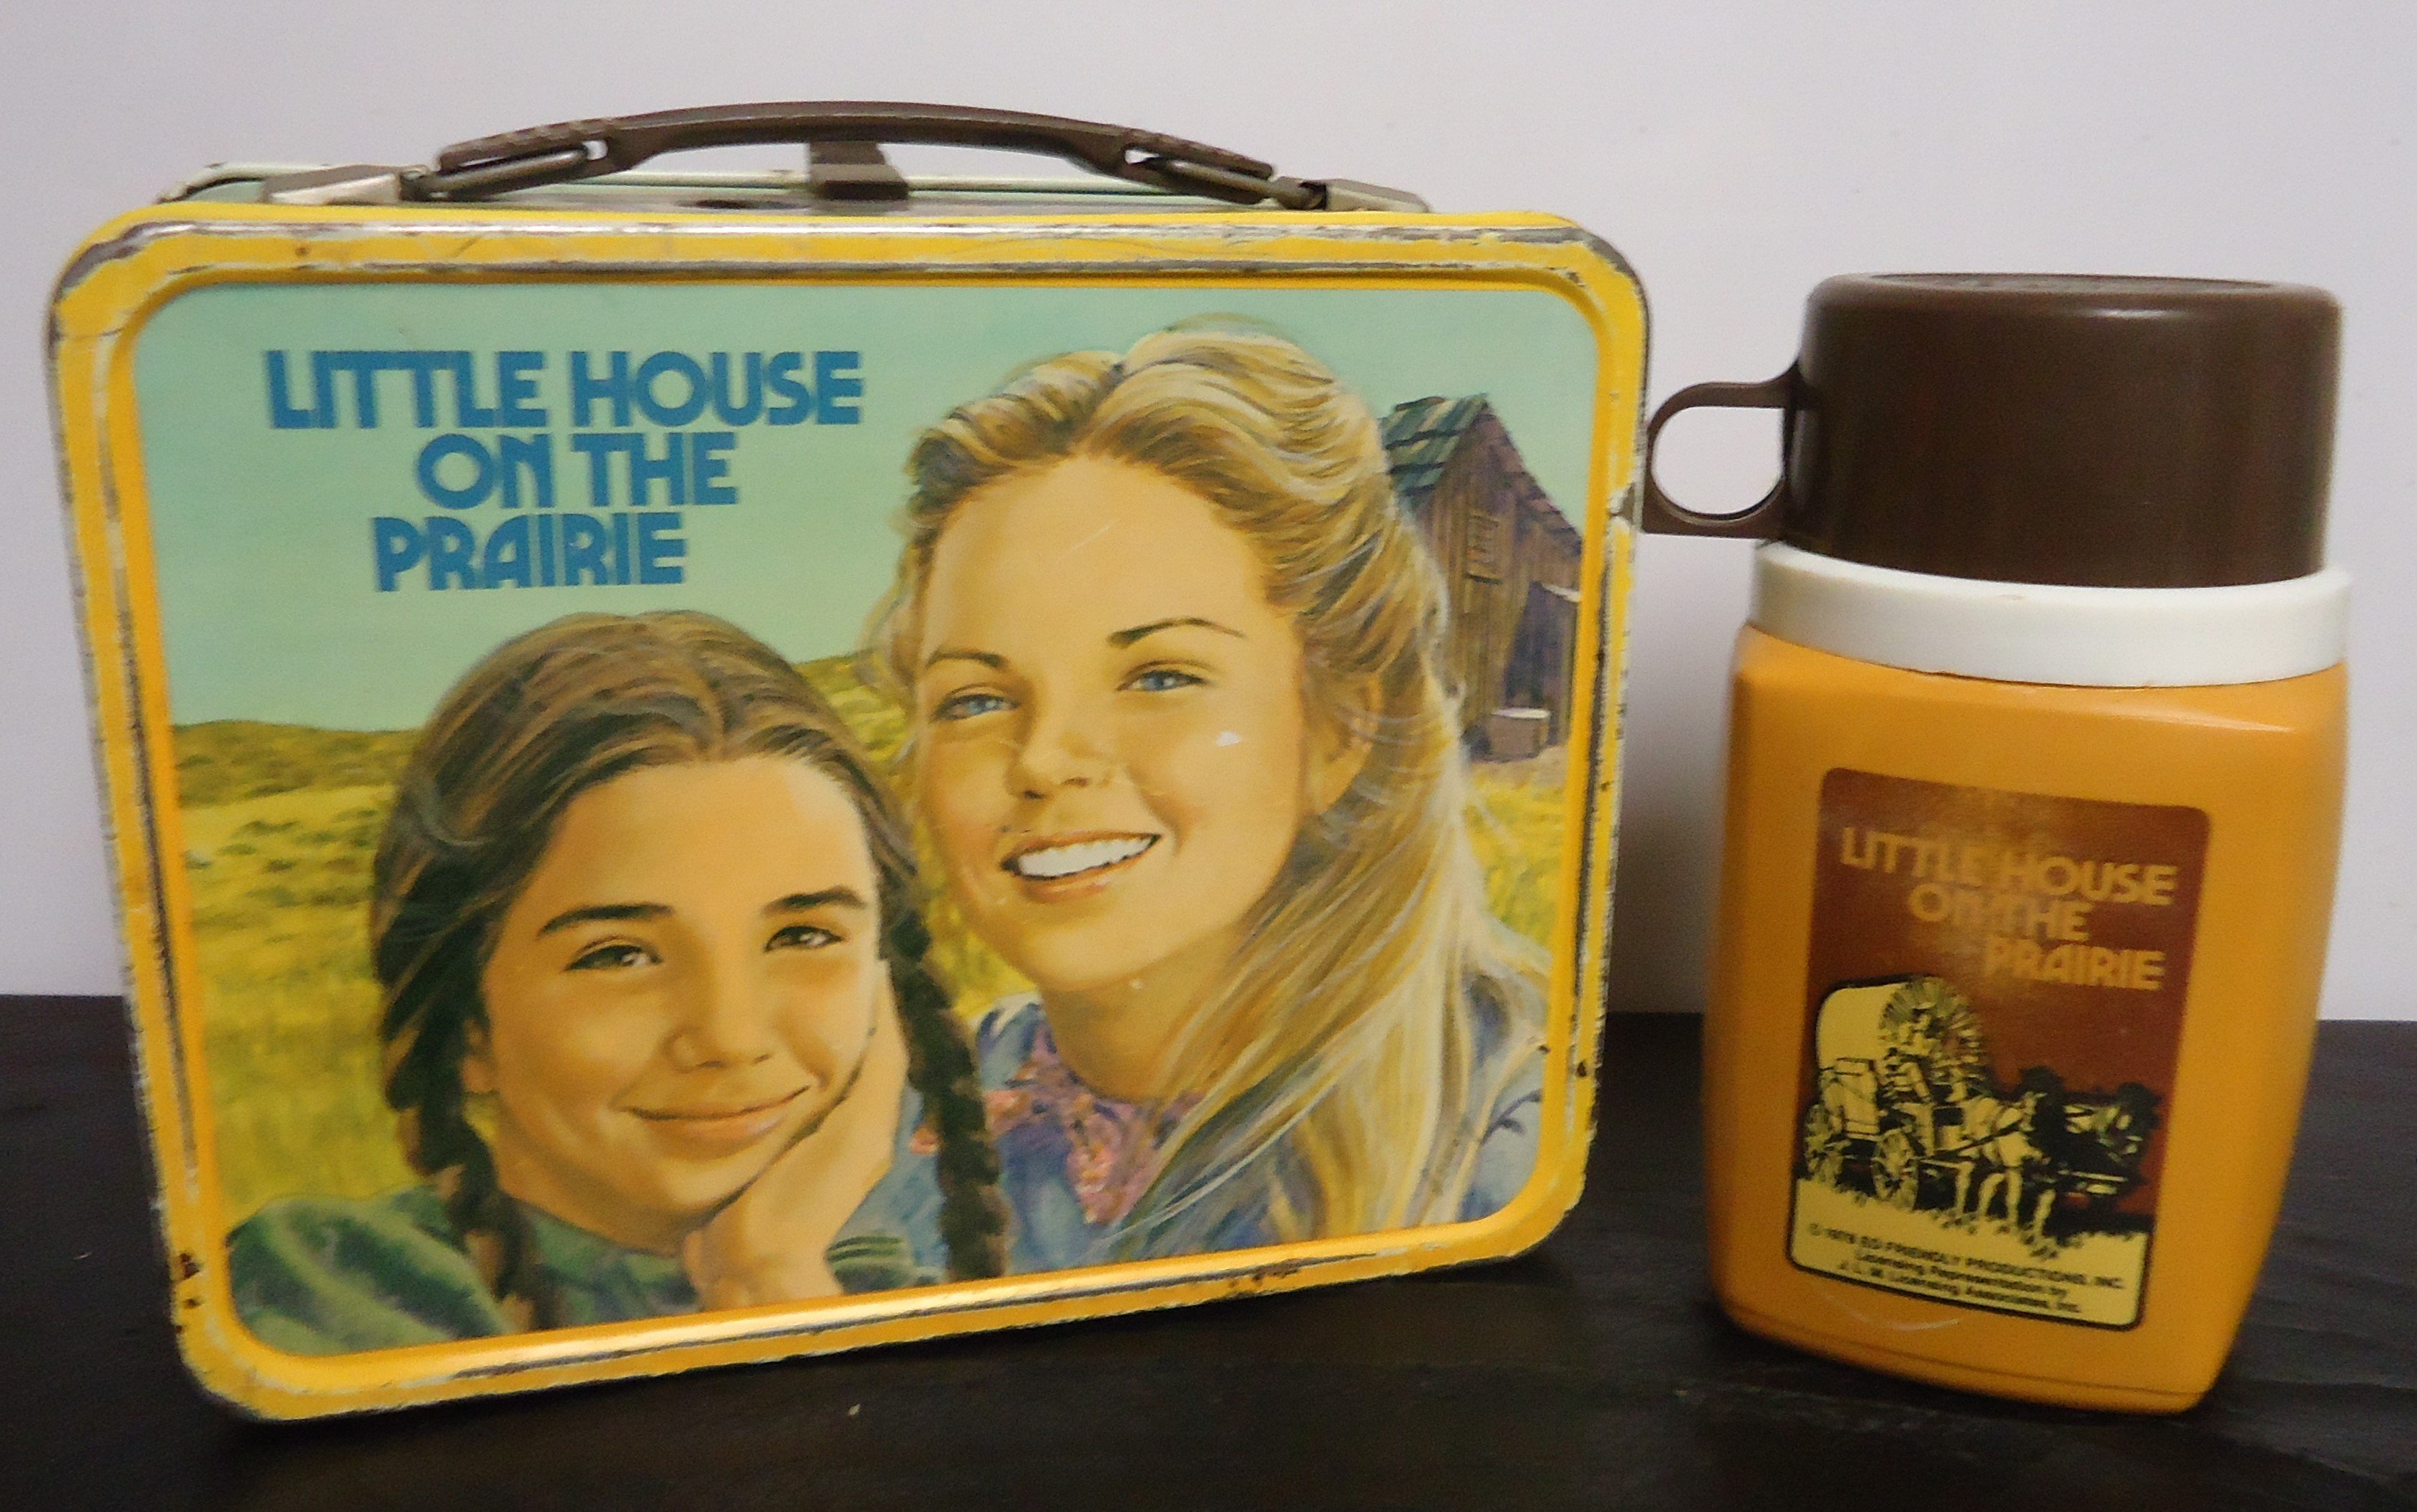 (1) Metal Lunch Box W/ Thermos
"Little House On The Prairie"
$135.00